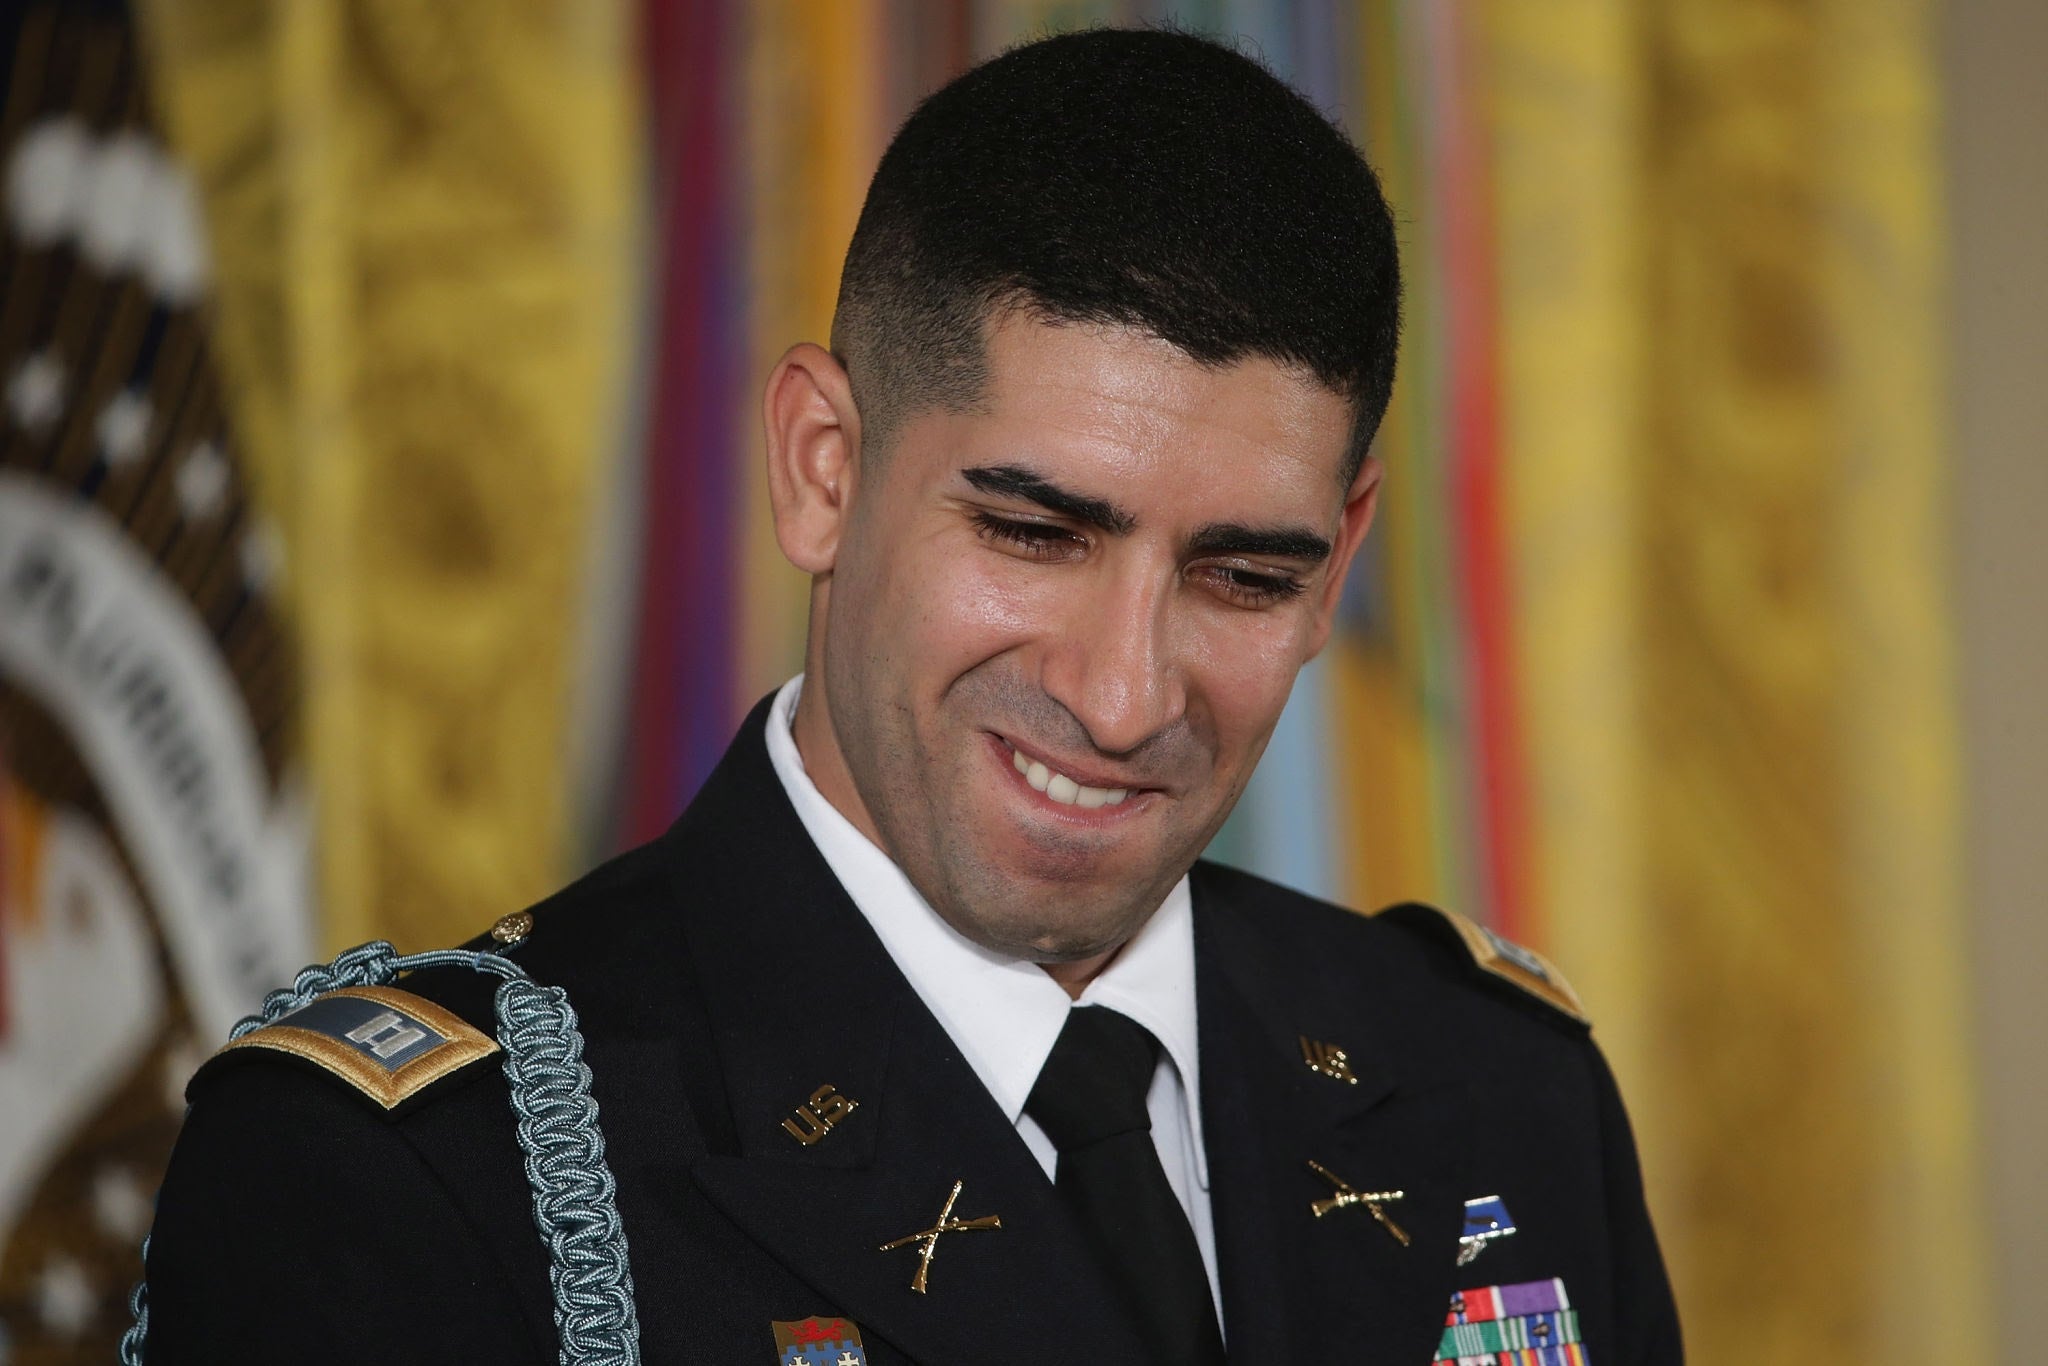 Medal of Honor for Tackling a Suicide Bomber in Coordinated Attack